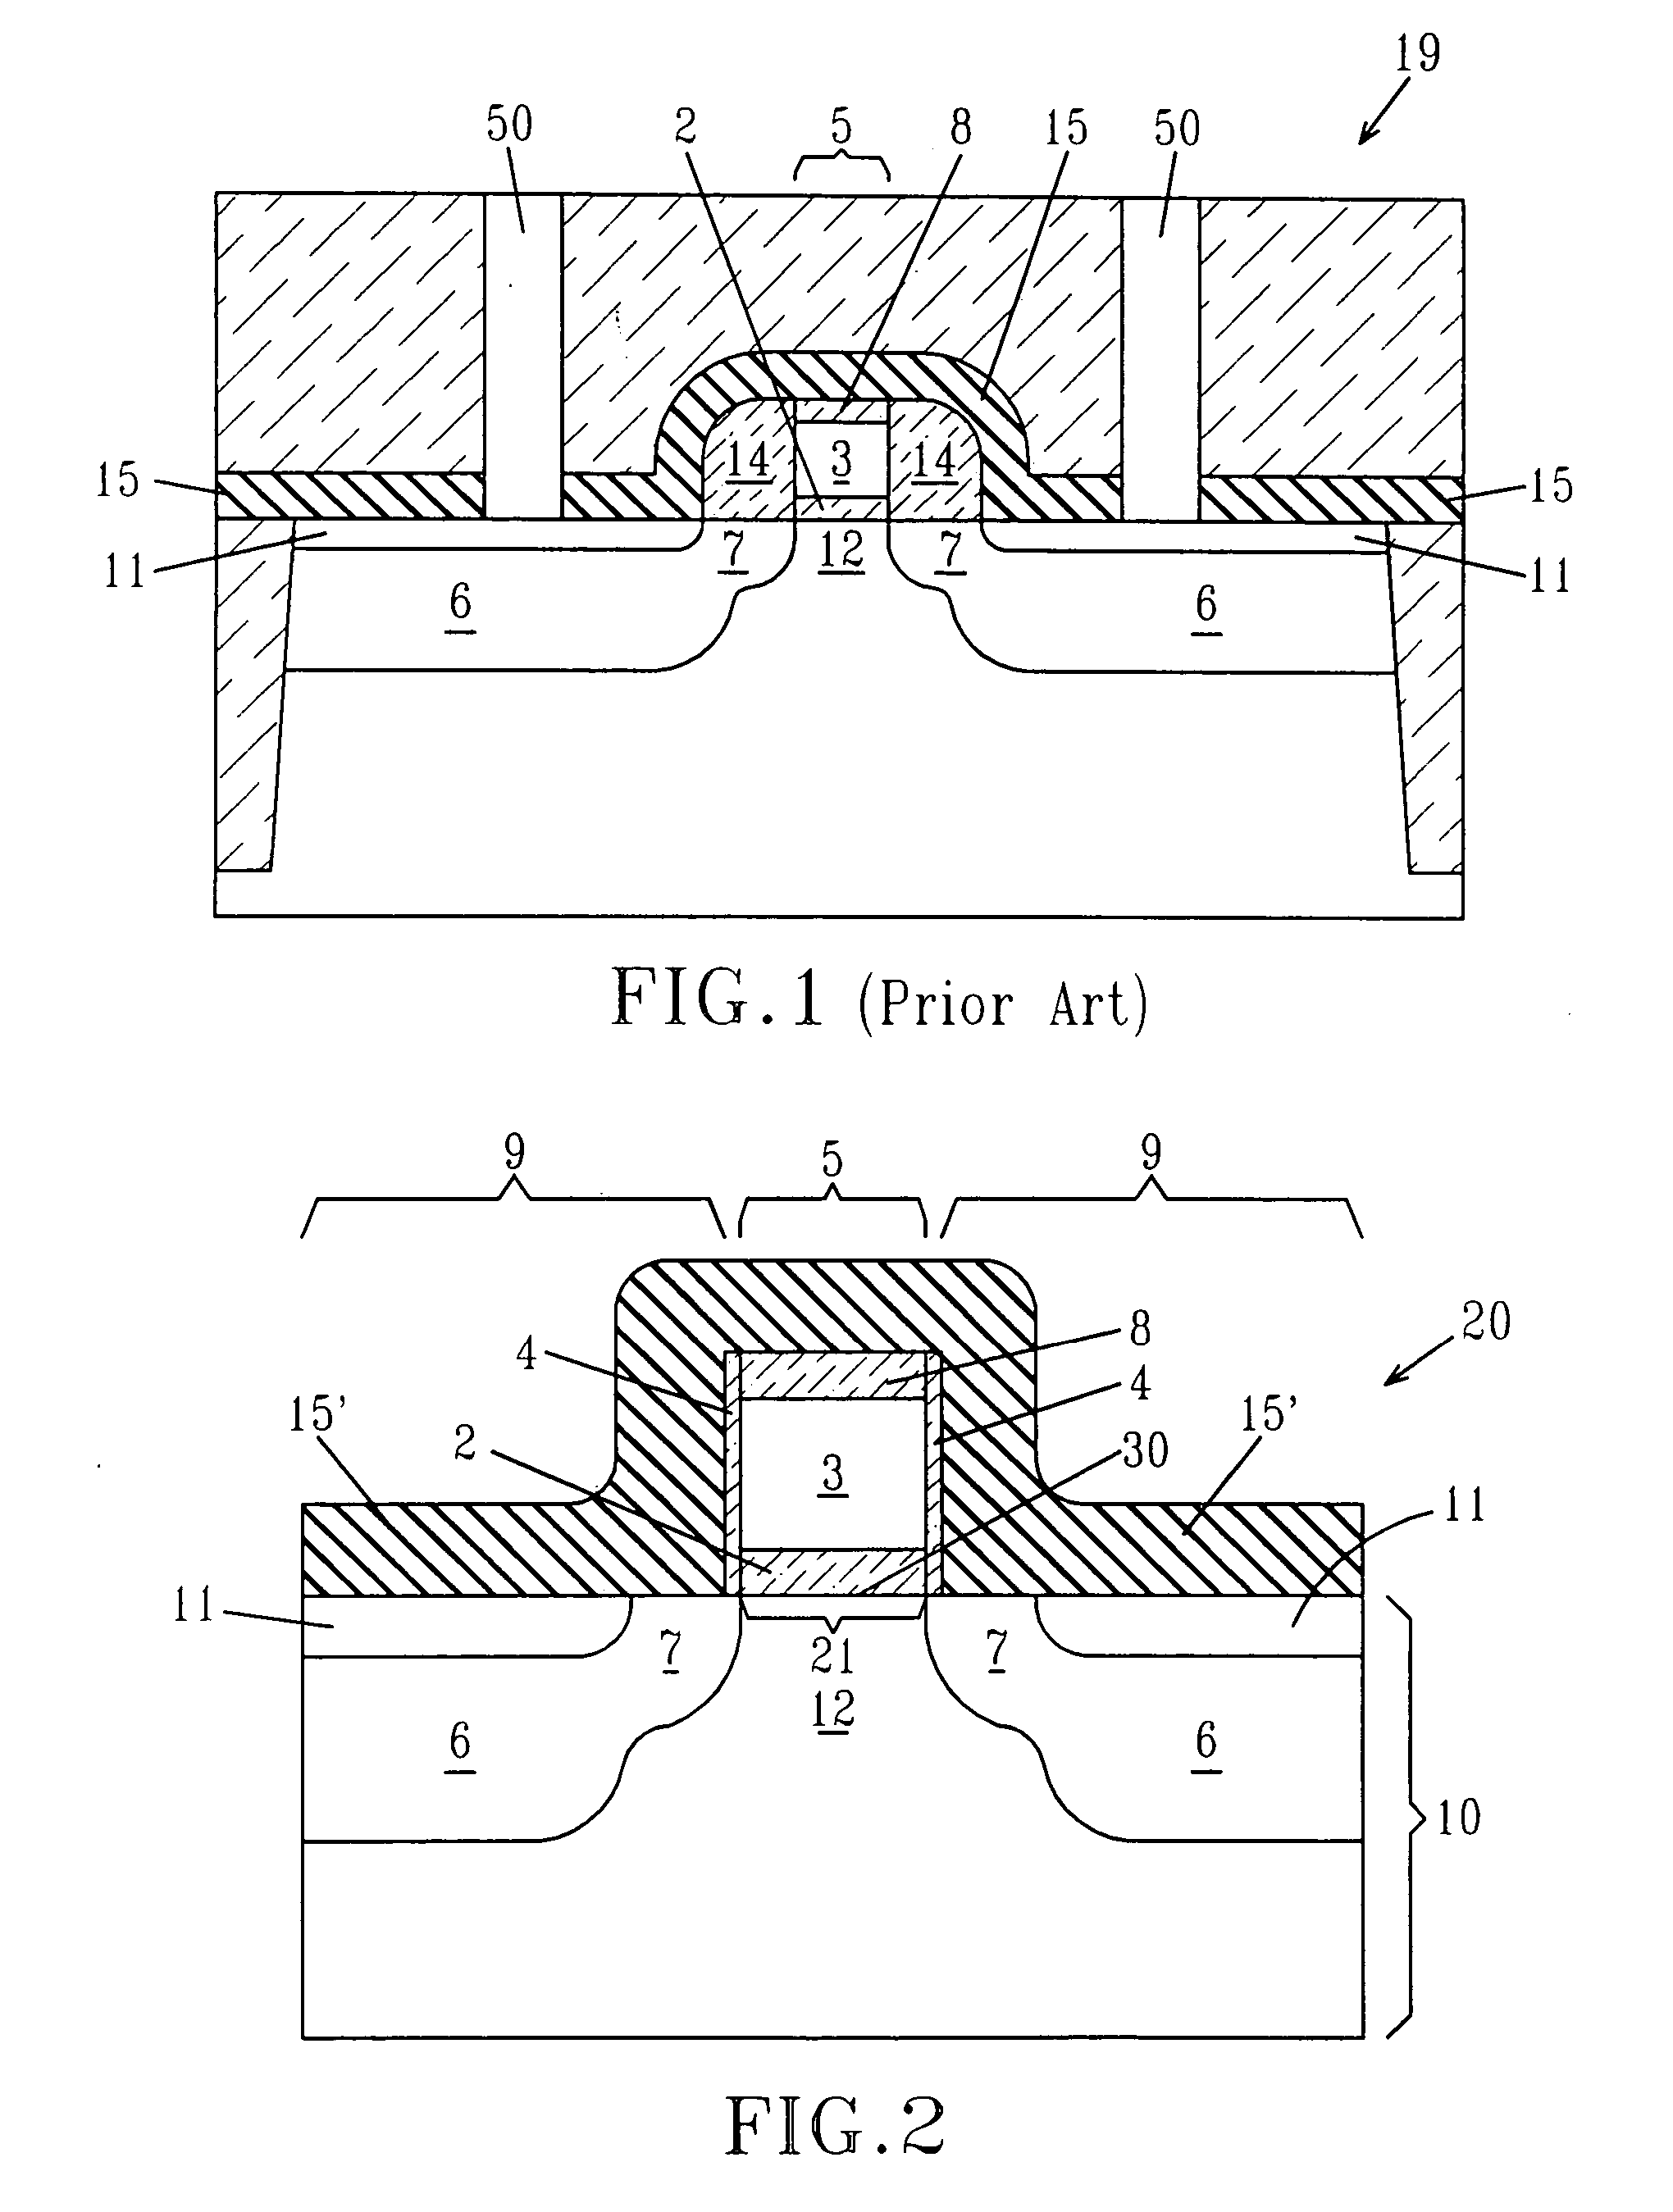 MOSFET structure with high mechanical stress in the channel